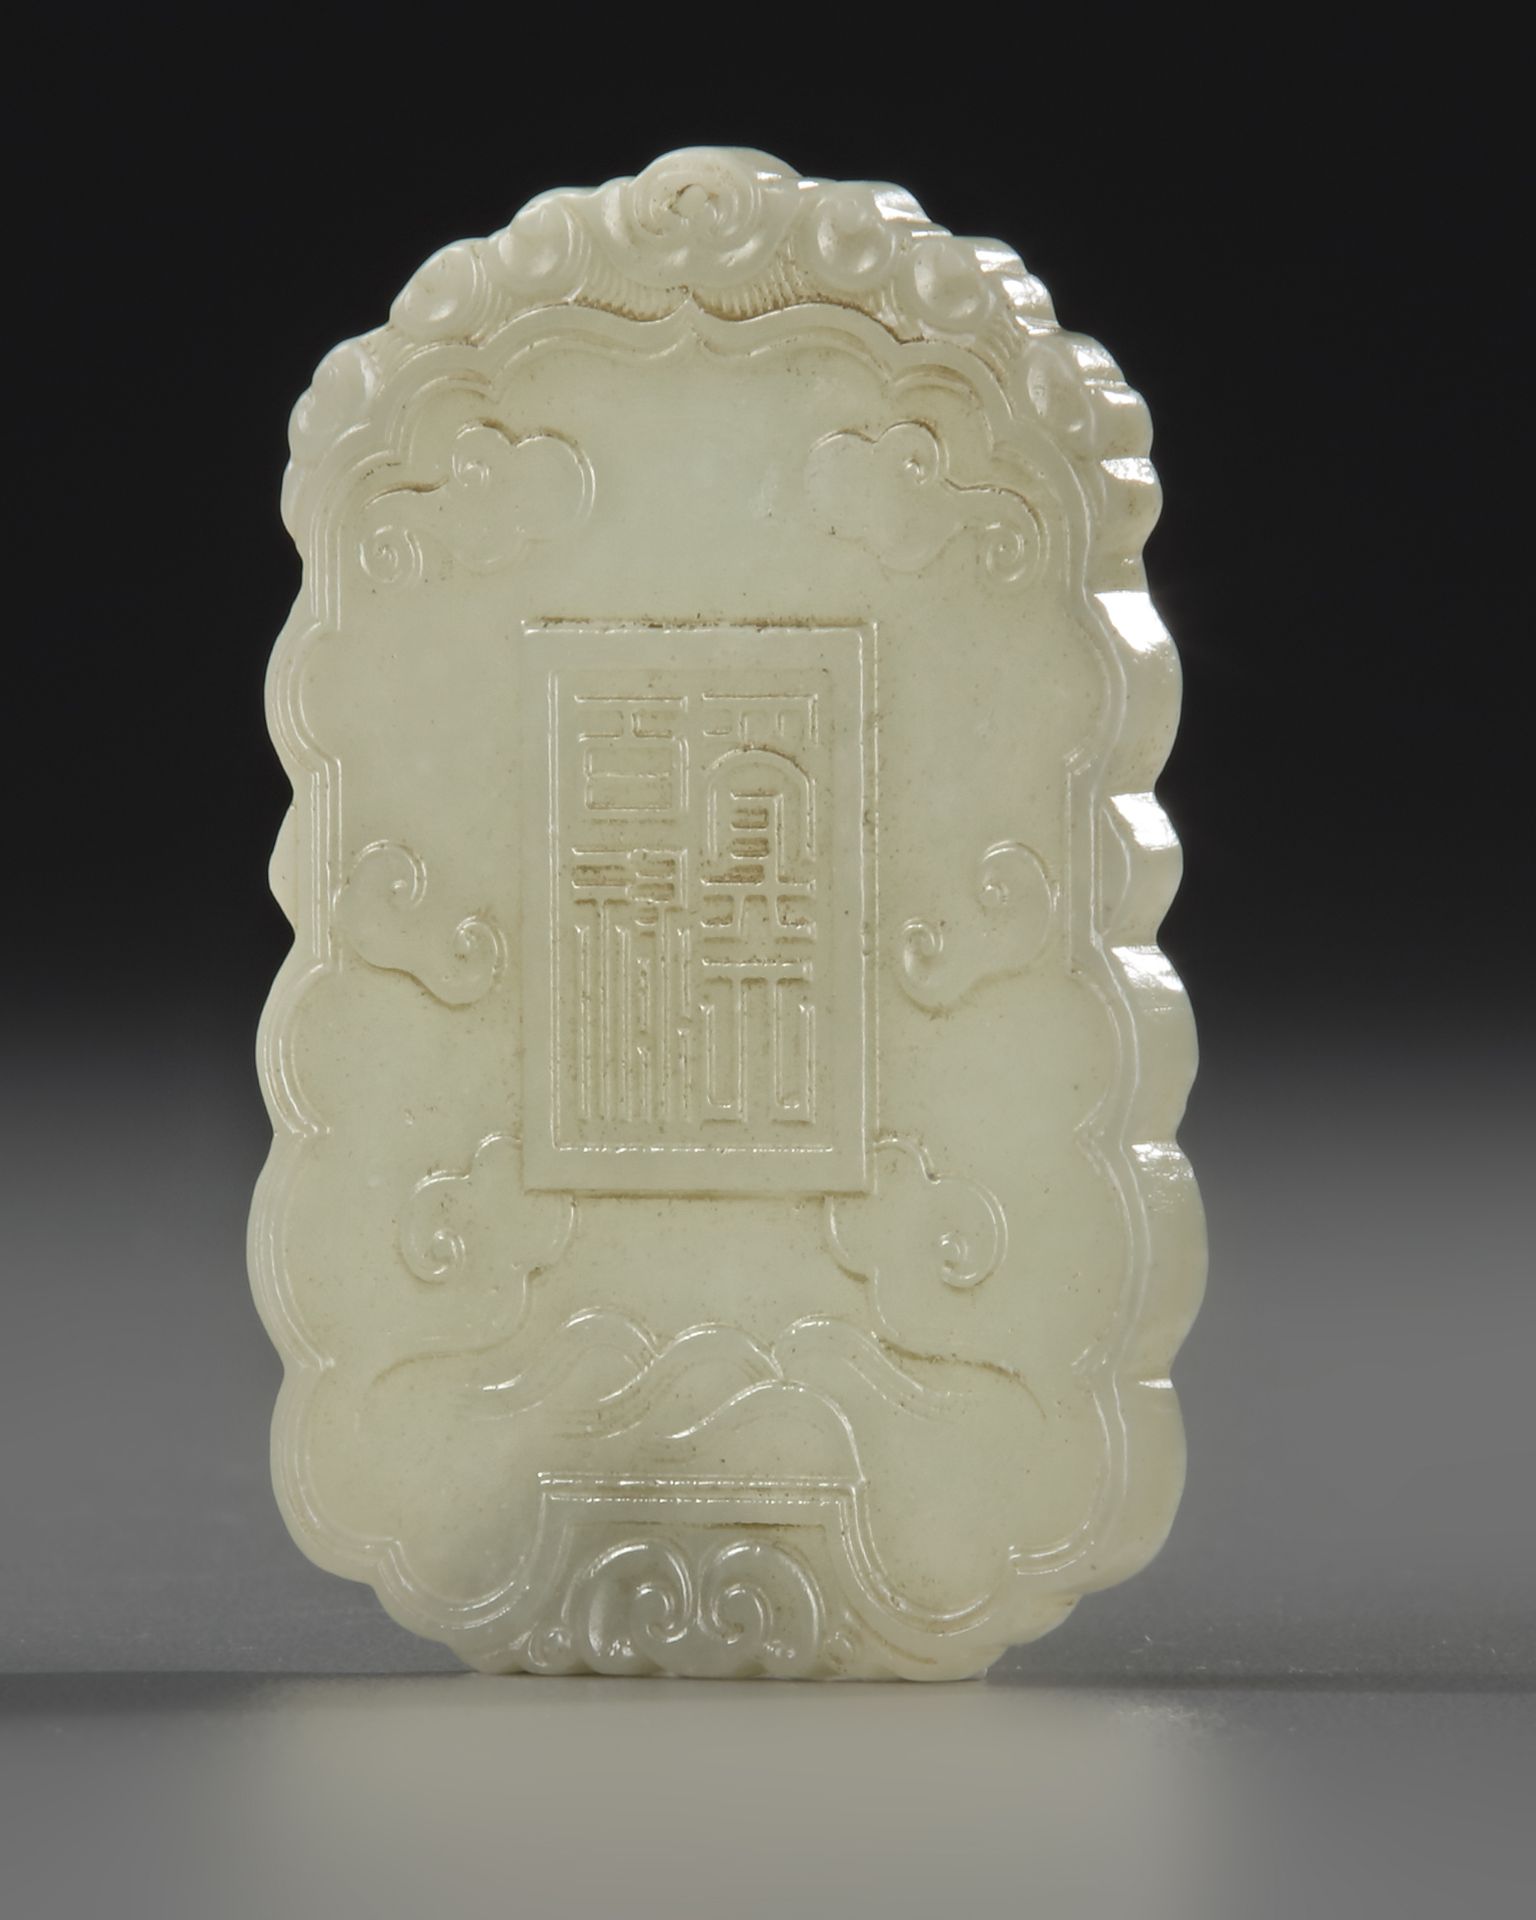 A CHINESE JADE CARVED PLAQUE, QING DYNASTY (1644-1911) - Image 3 of 4